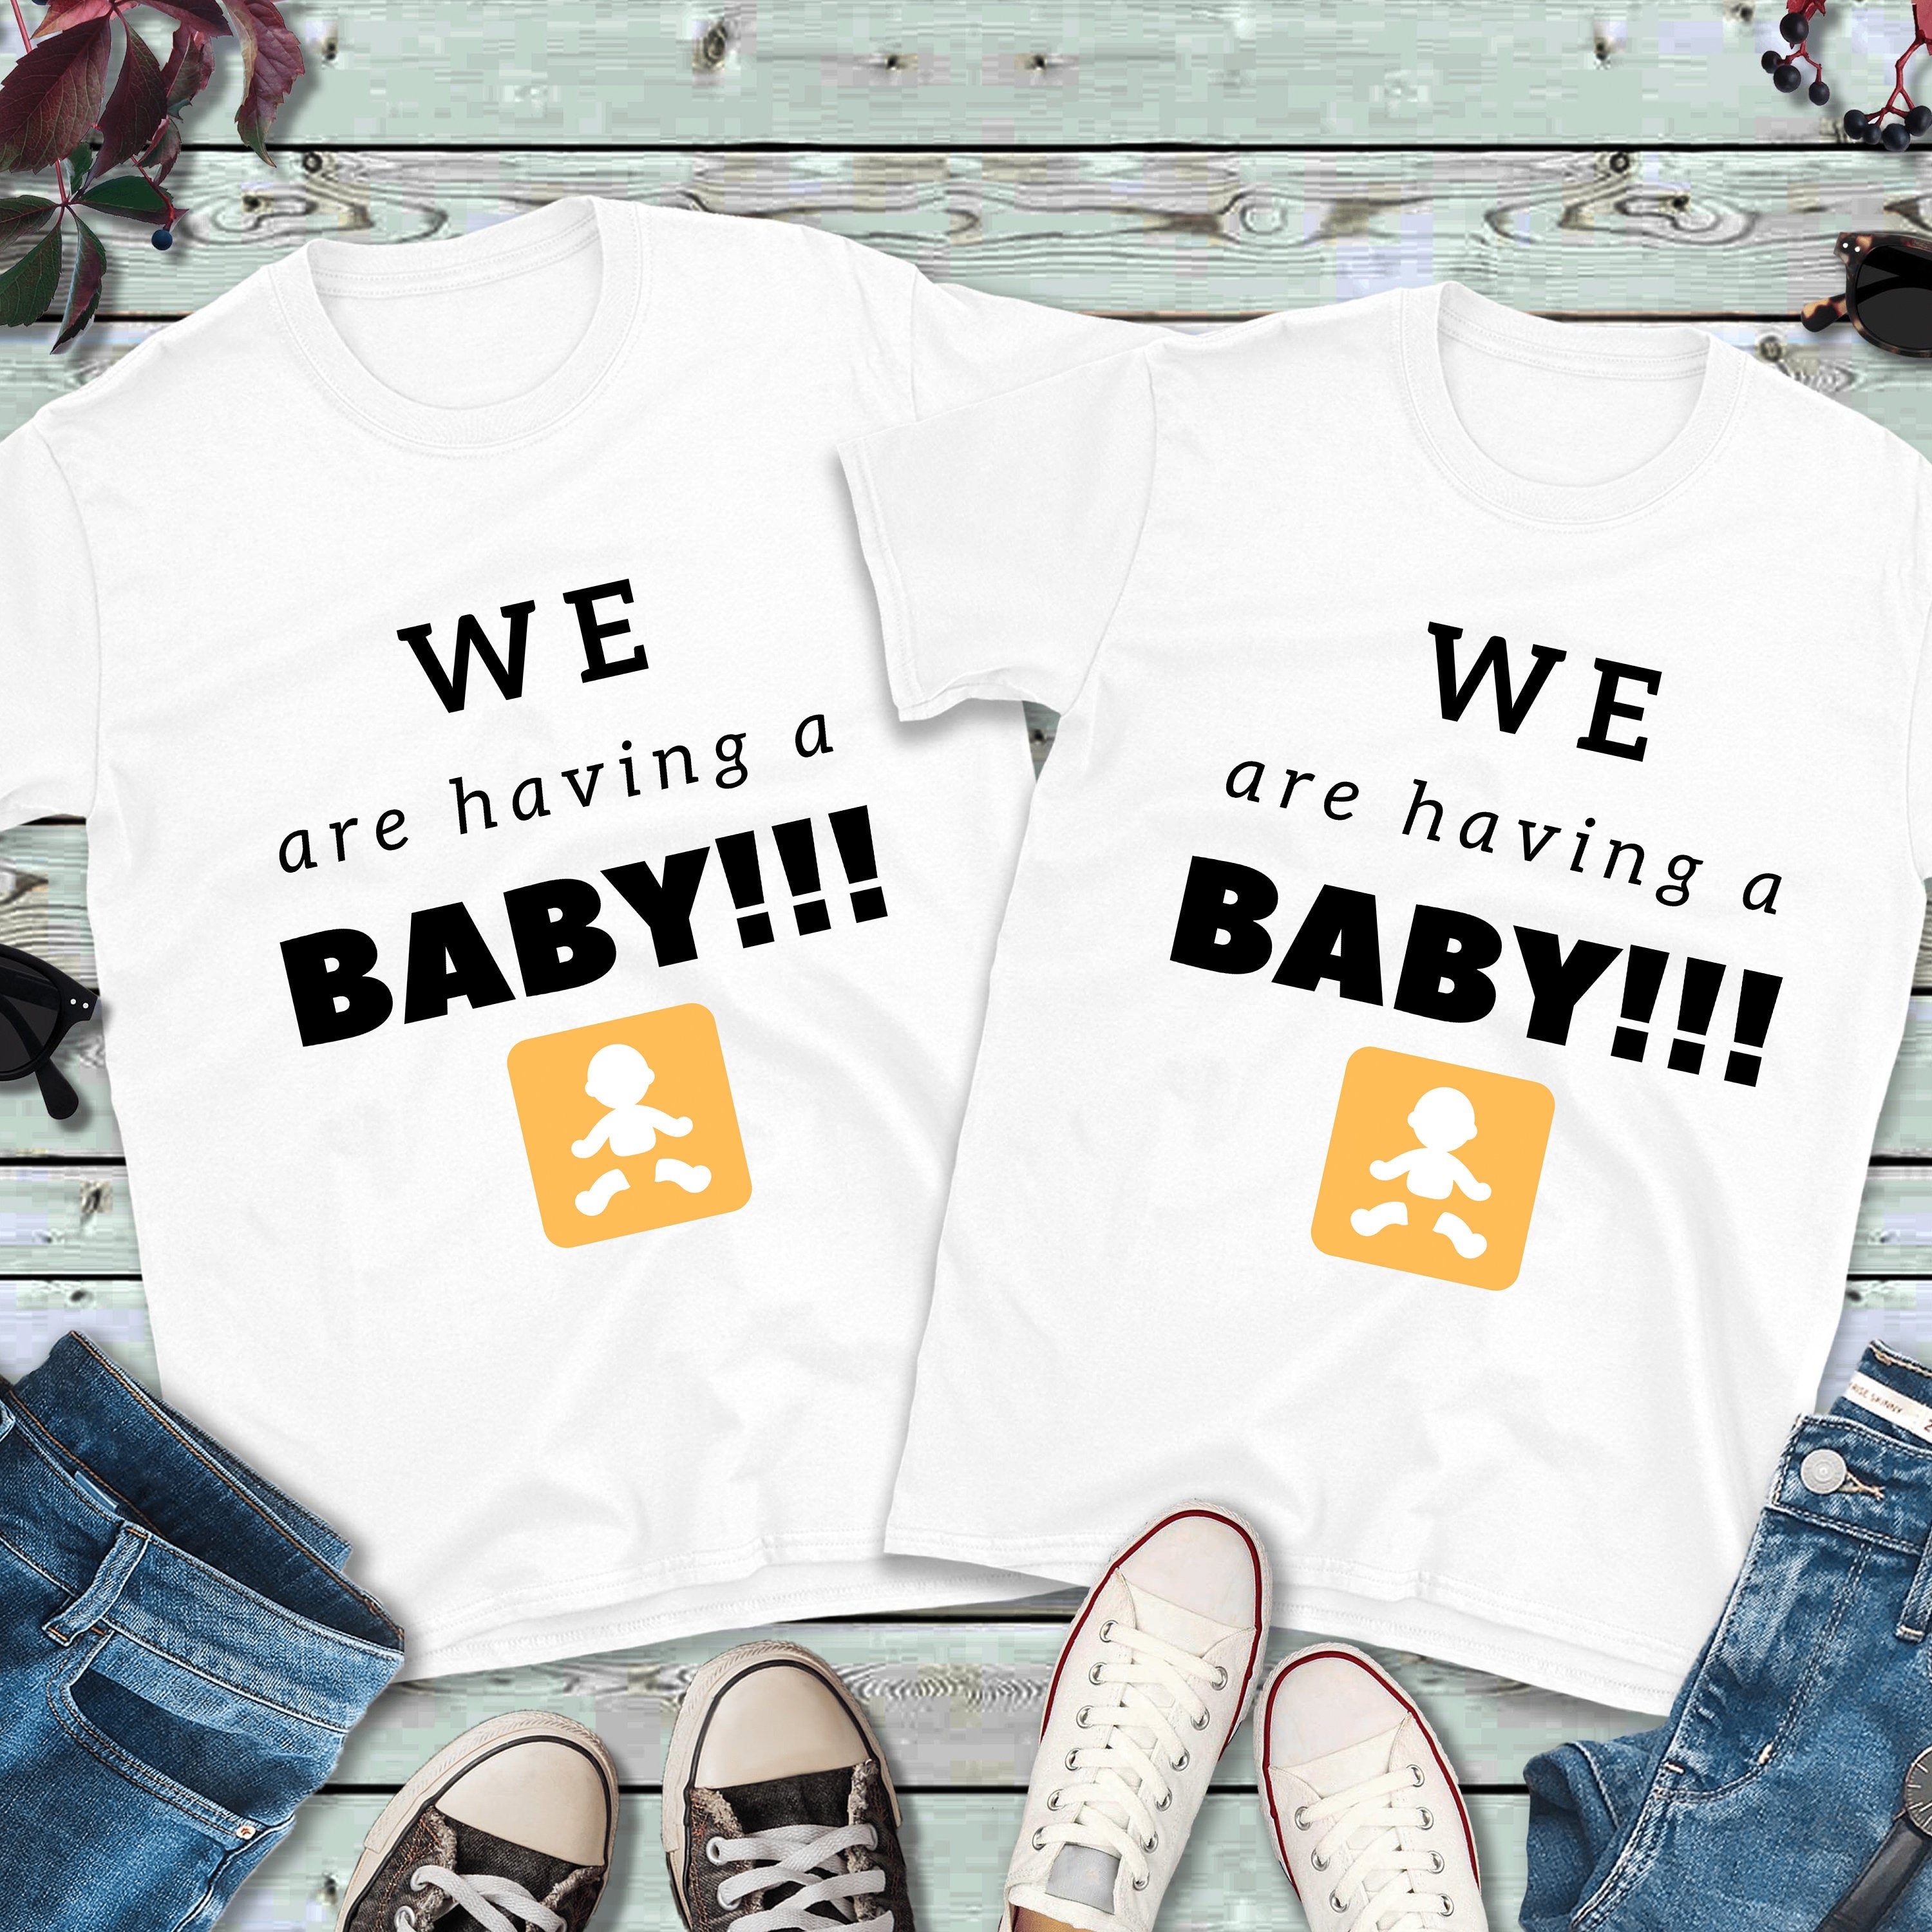 Best Couple Shirts, Funny Couple Shirts, Couple Shirts, Valentines Gifts For Him, Matching Shirts For Couples - MamaBuzz Creations